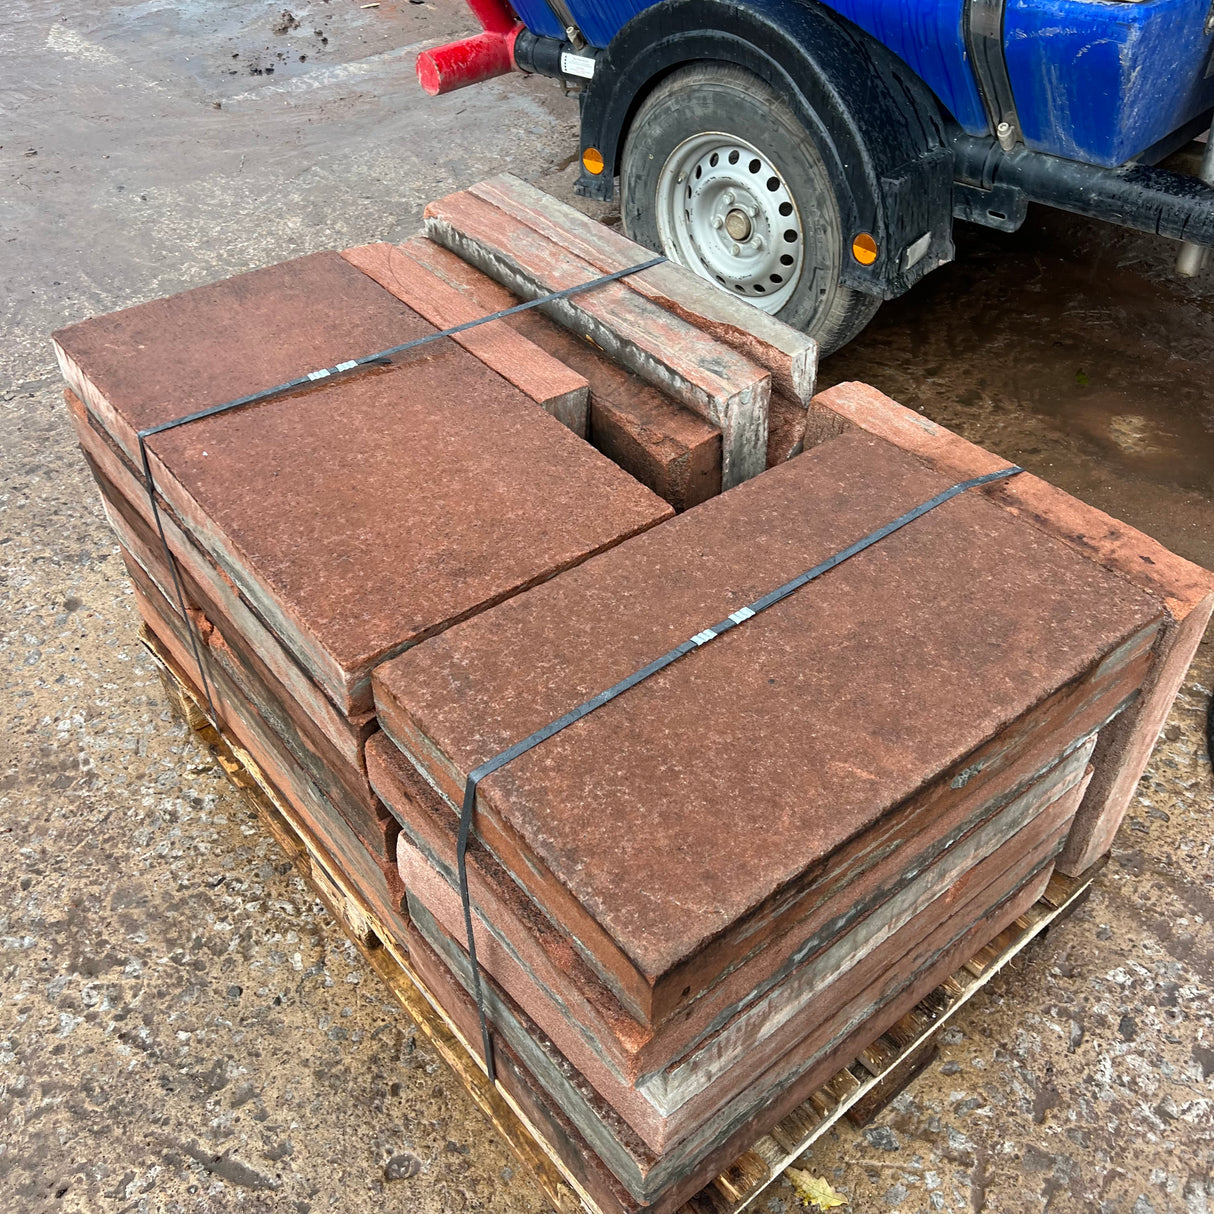 Reclaimed Sawn Red Sand Stone Paving Flag Stones